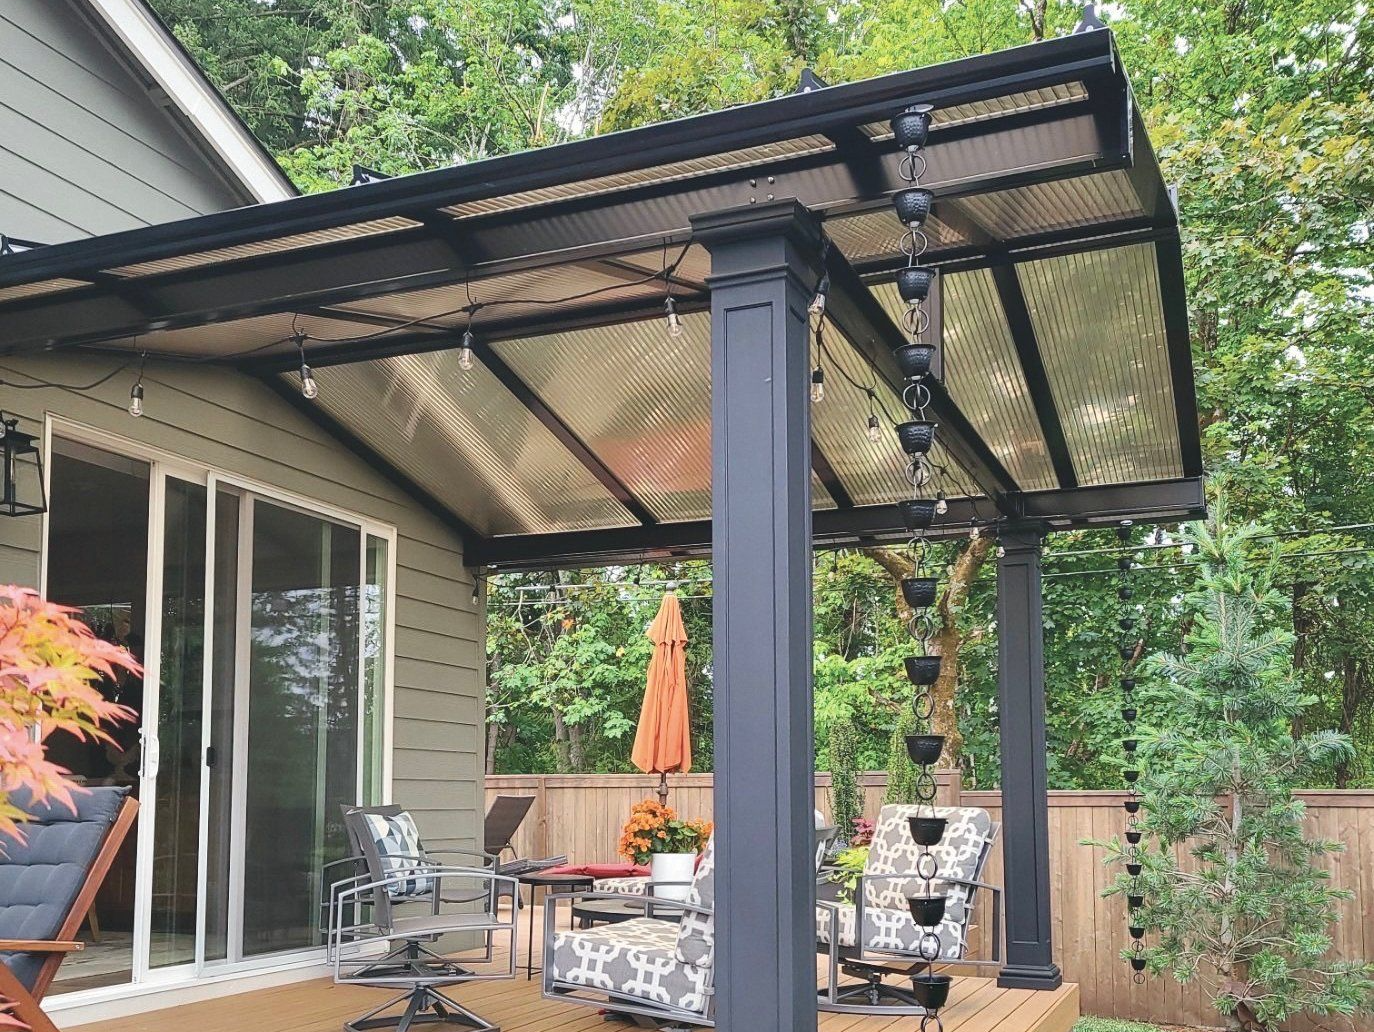 Patio Covers in Skyline Oregon - Gable Roof with ACRYLITE Acrylic